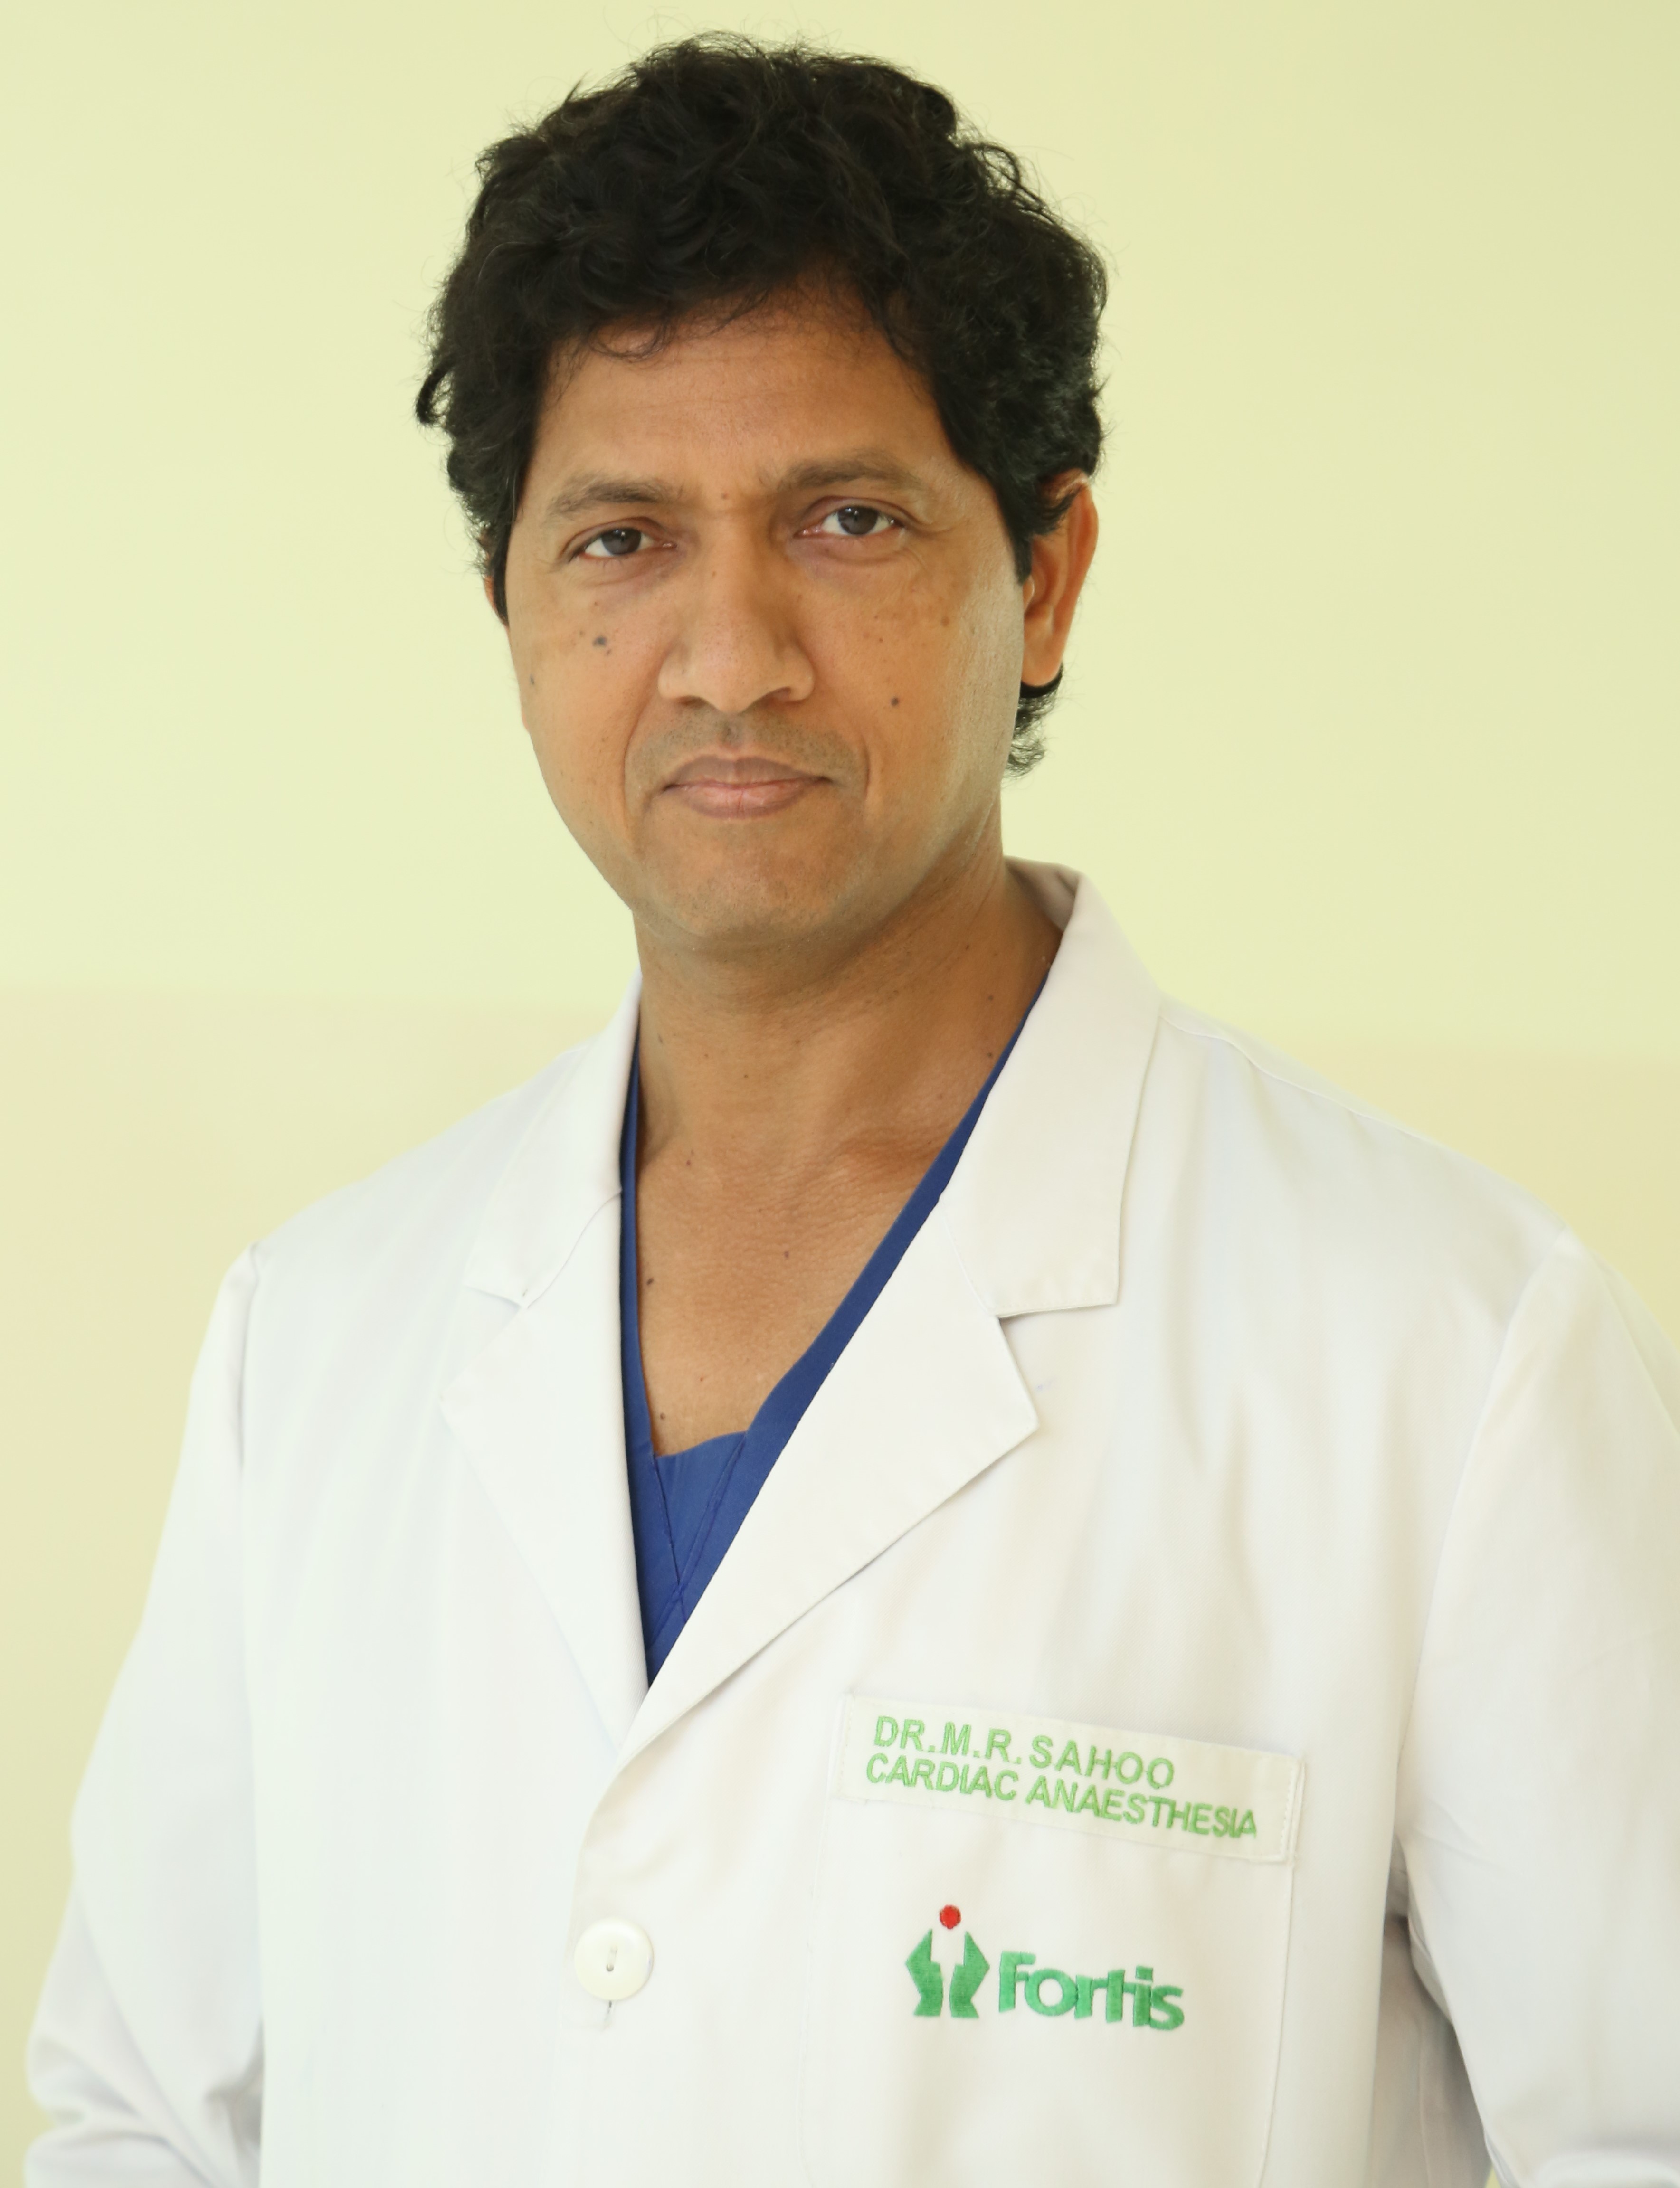 Dr. Manoranjan Sahoo Support Specialties | Anaesthesia Fortis Hospital, Mohali